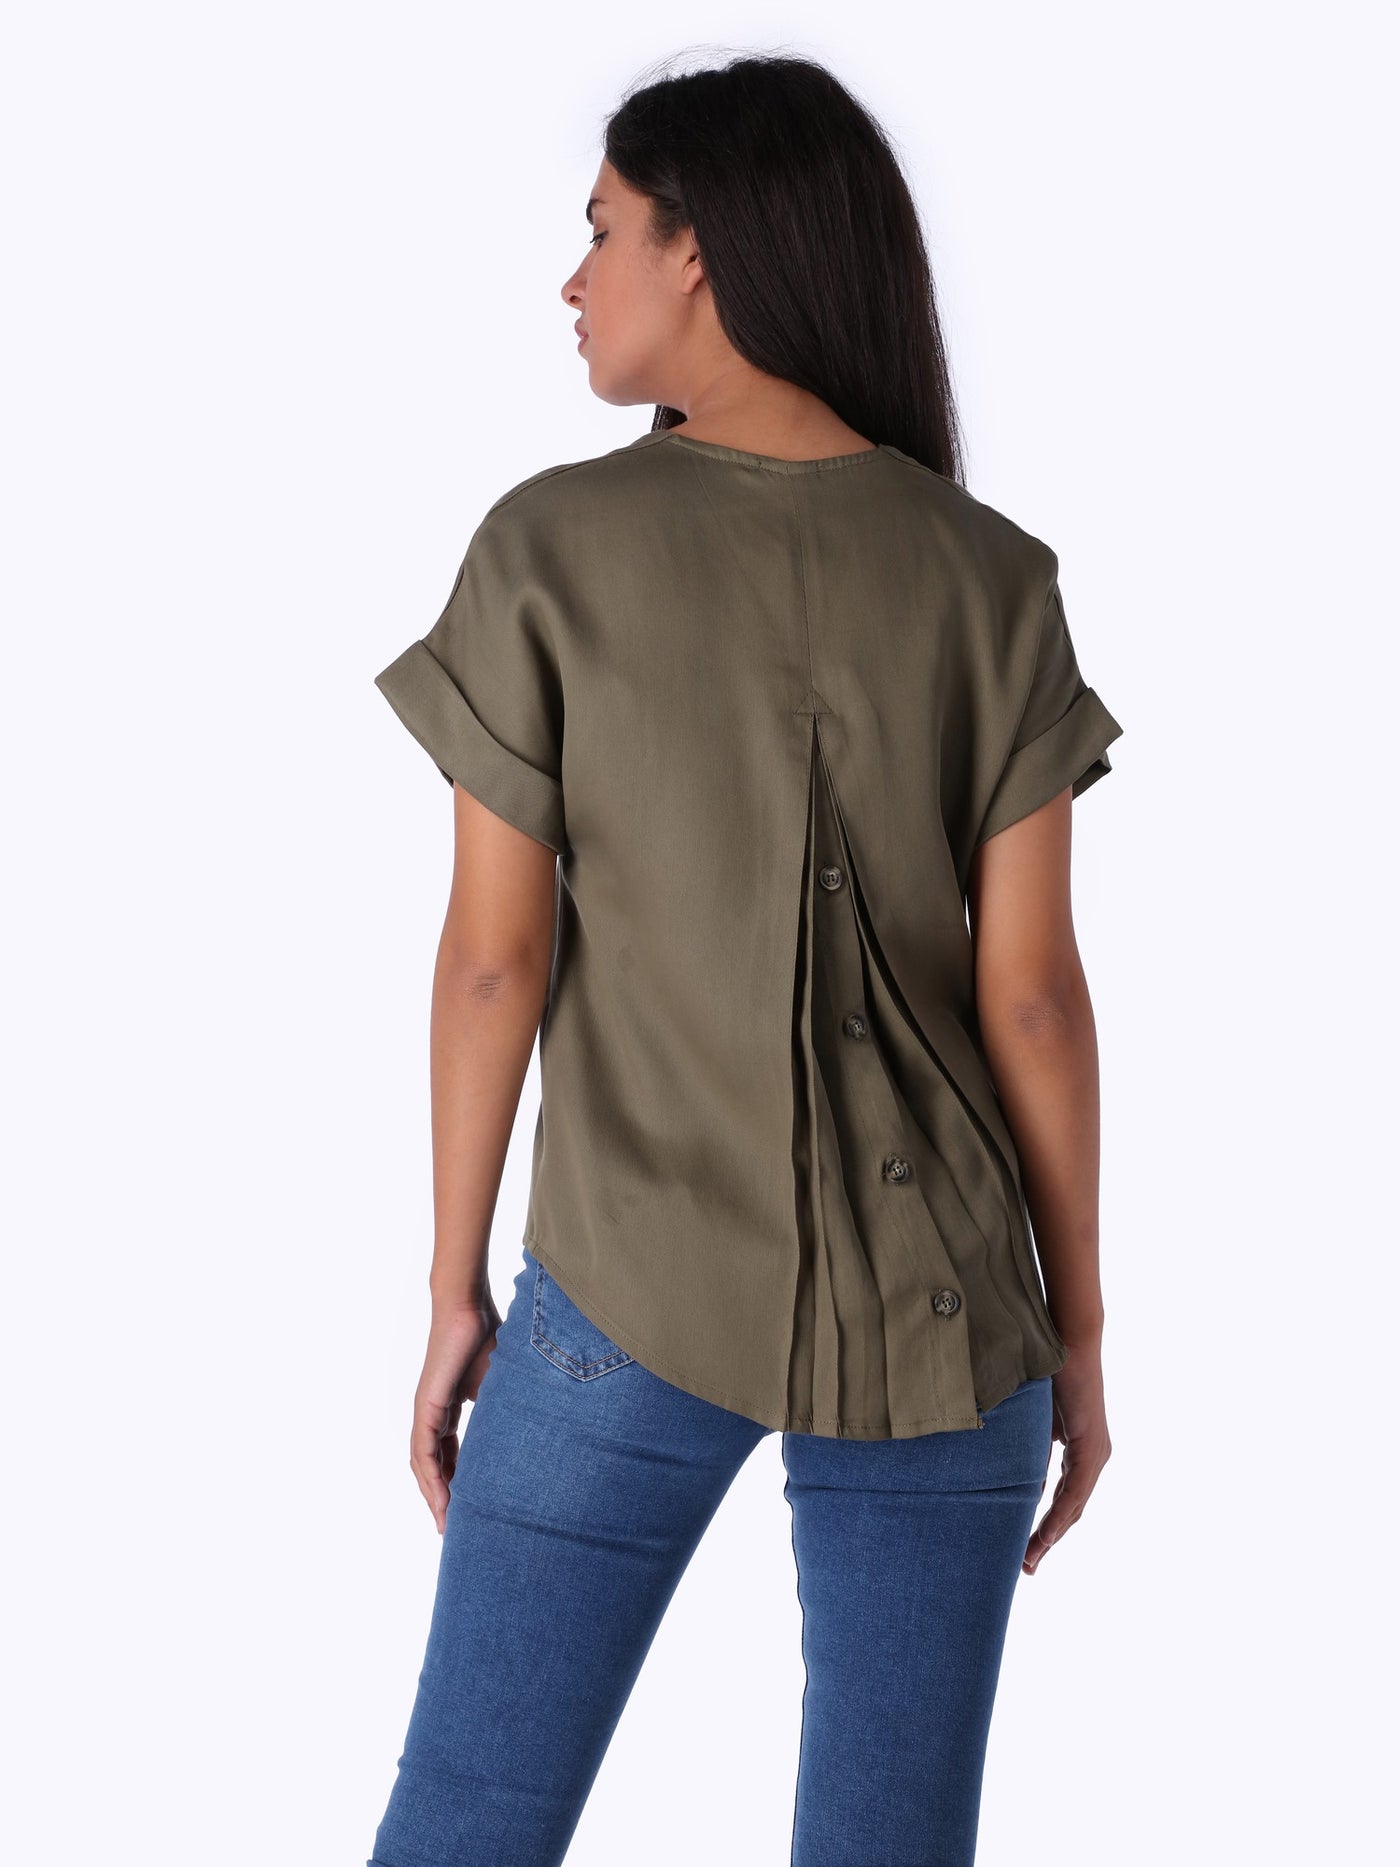 OR Women's V-Neck Front Pleat Top